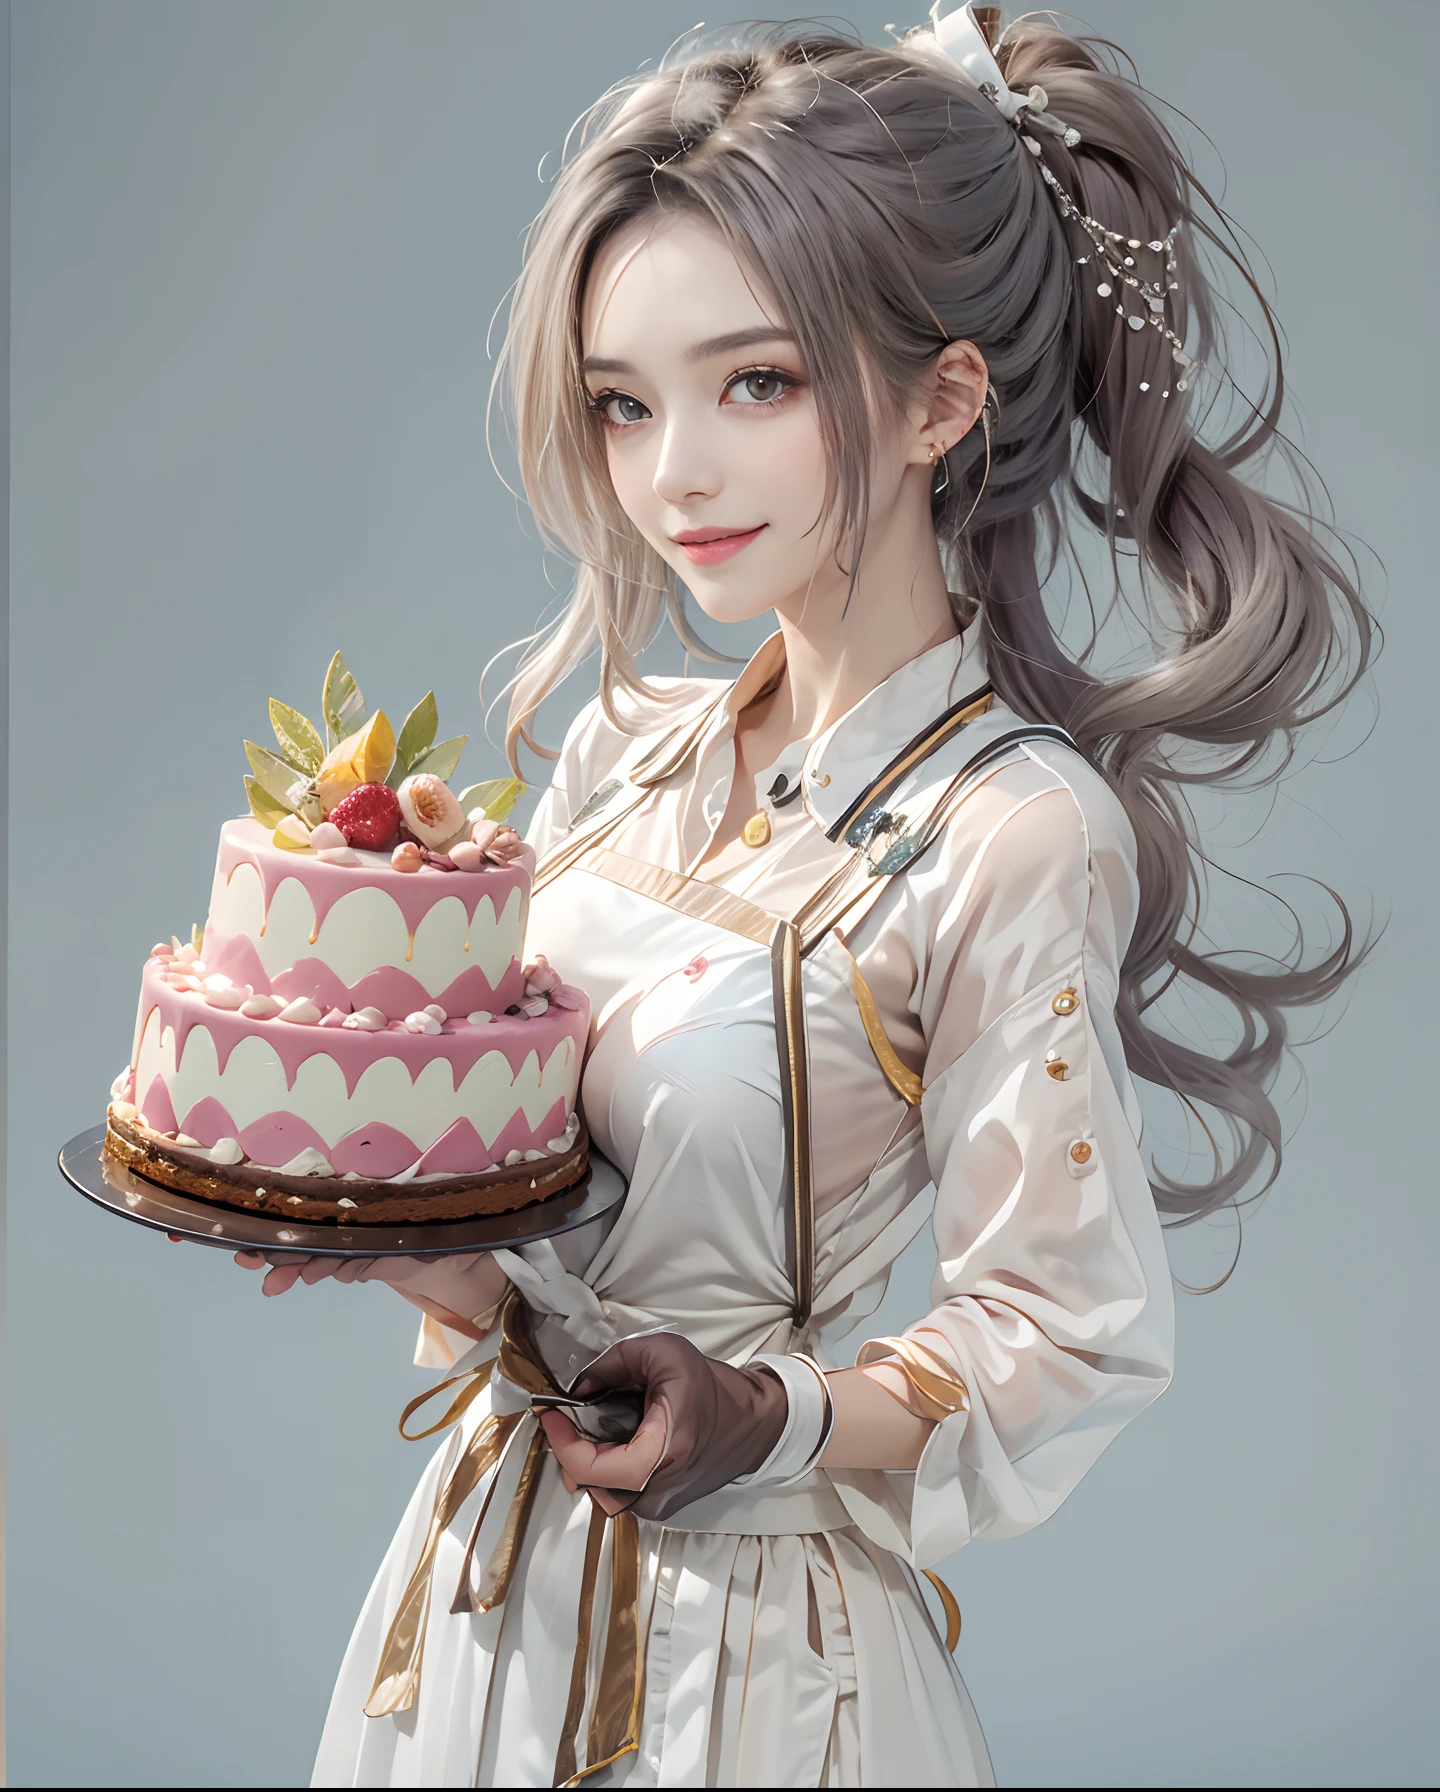 masutepiece、hight resolution、Cake shop、Cake craftsman、30-year-old girl、Smiling at the camera、Finish as shown in the photo、the skin is white and beautiful、inner colored、Hair should be tied back、A slender、耳Nipple Ring、